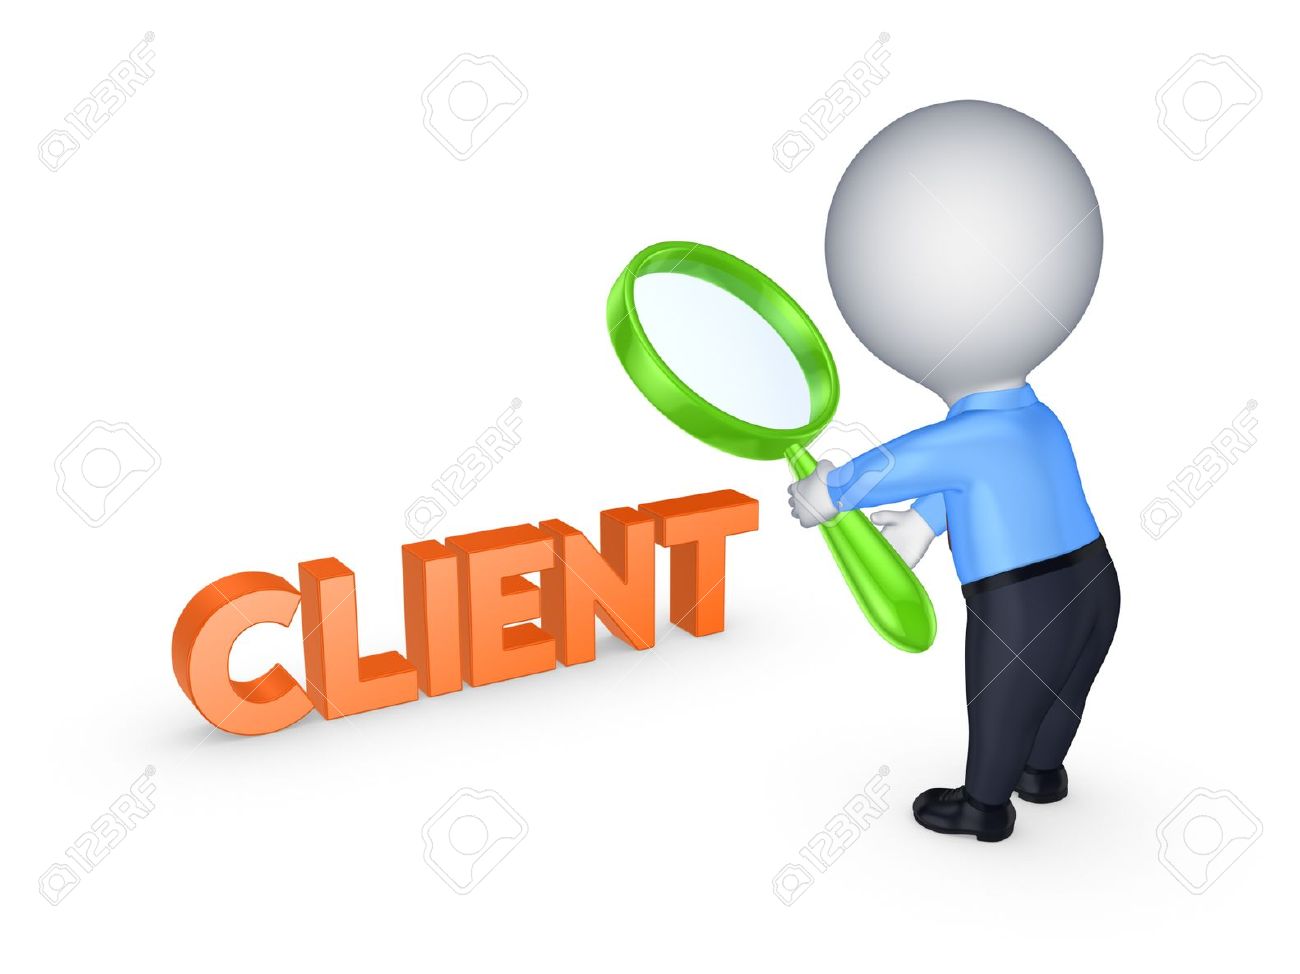 What to expect when you are looking for clients